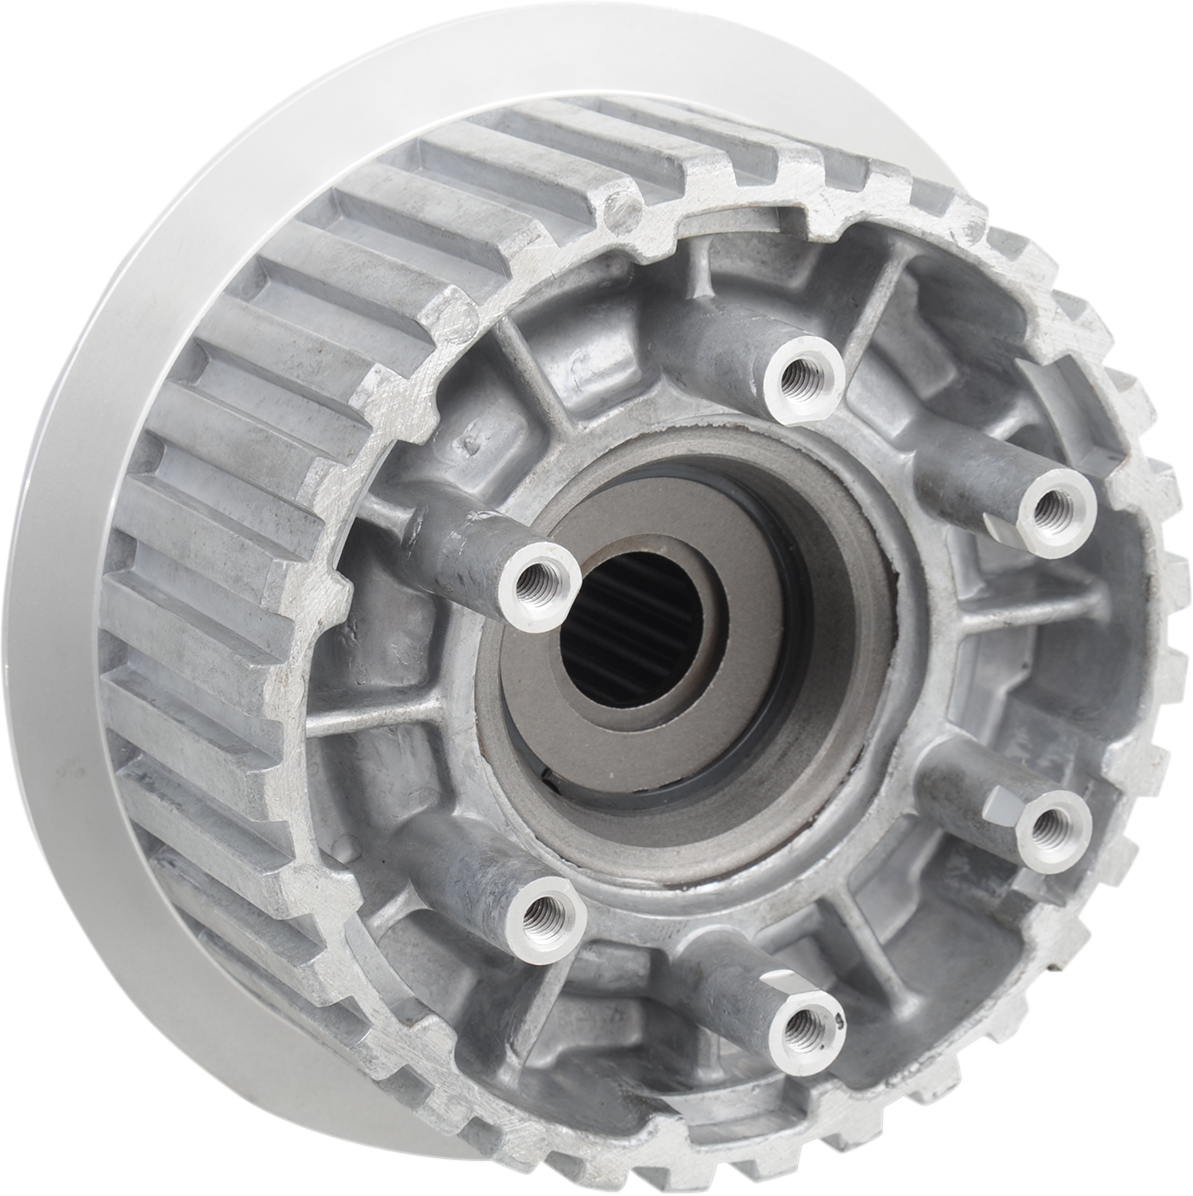 Drag Specialties Inner Clutch Hub fits 2007-2010 Harley Davidson Touring Softail